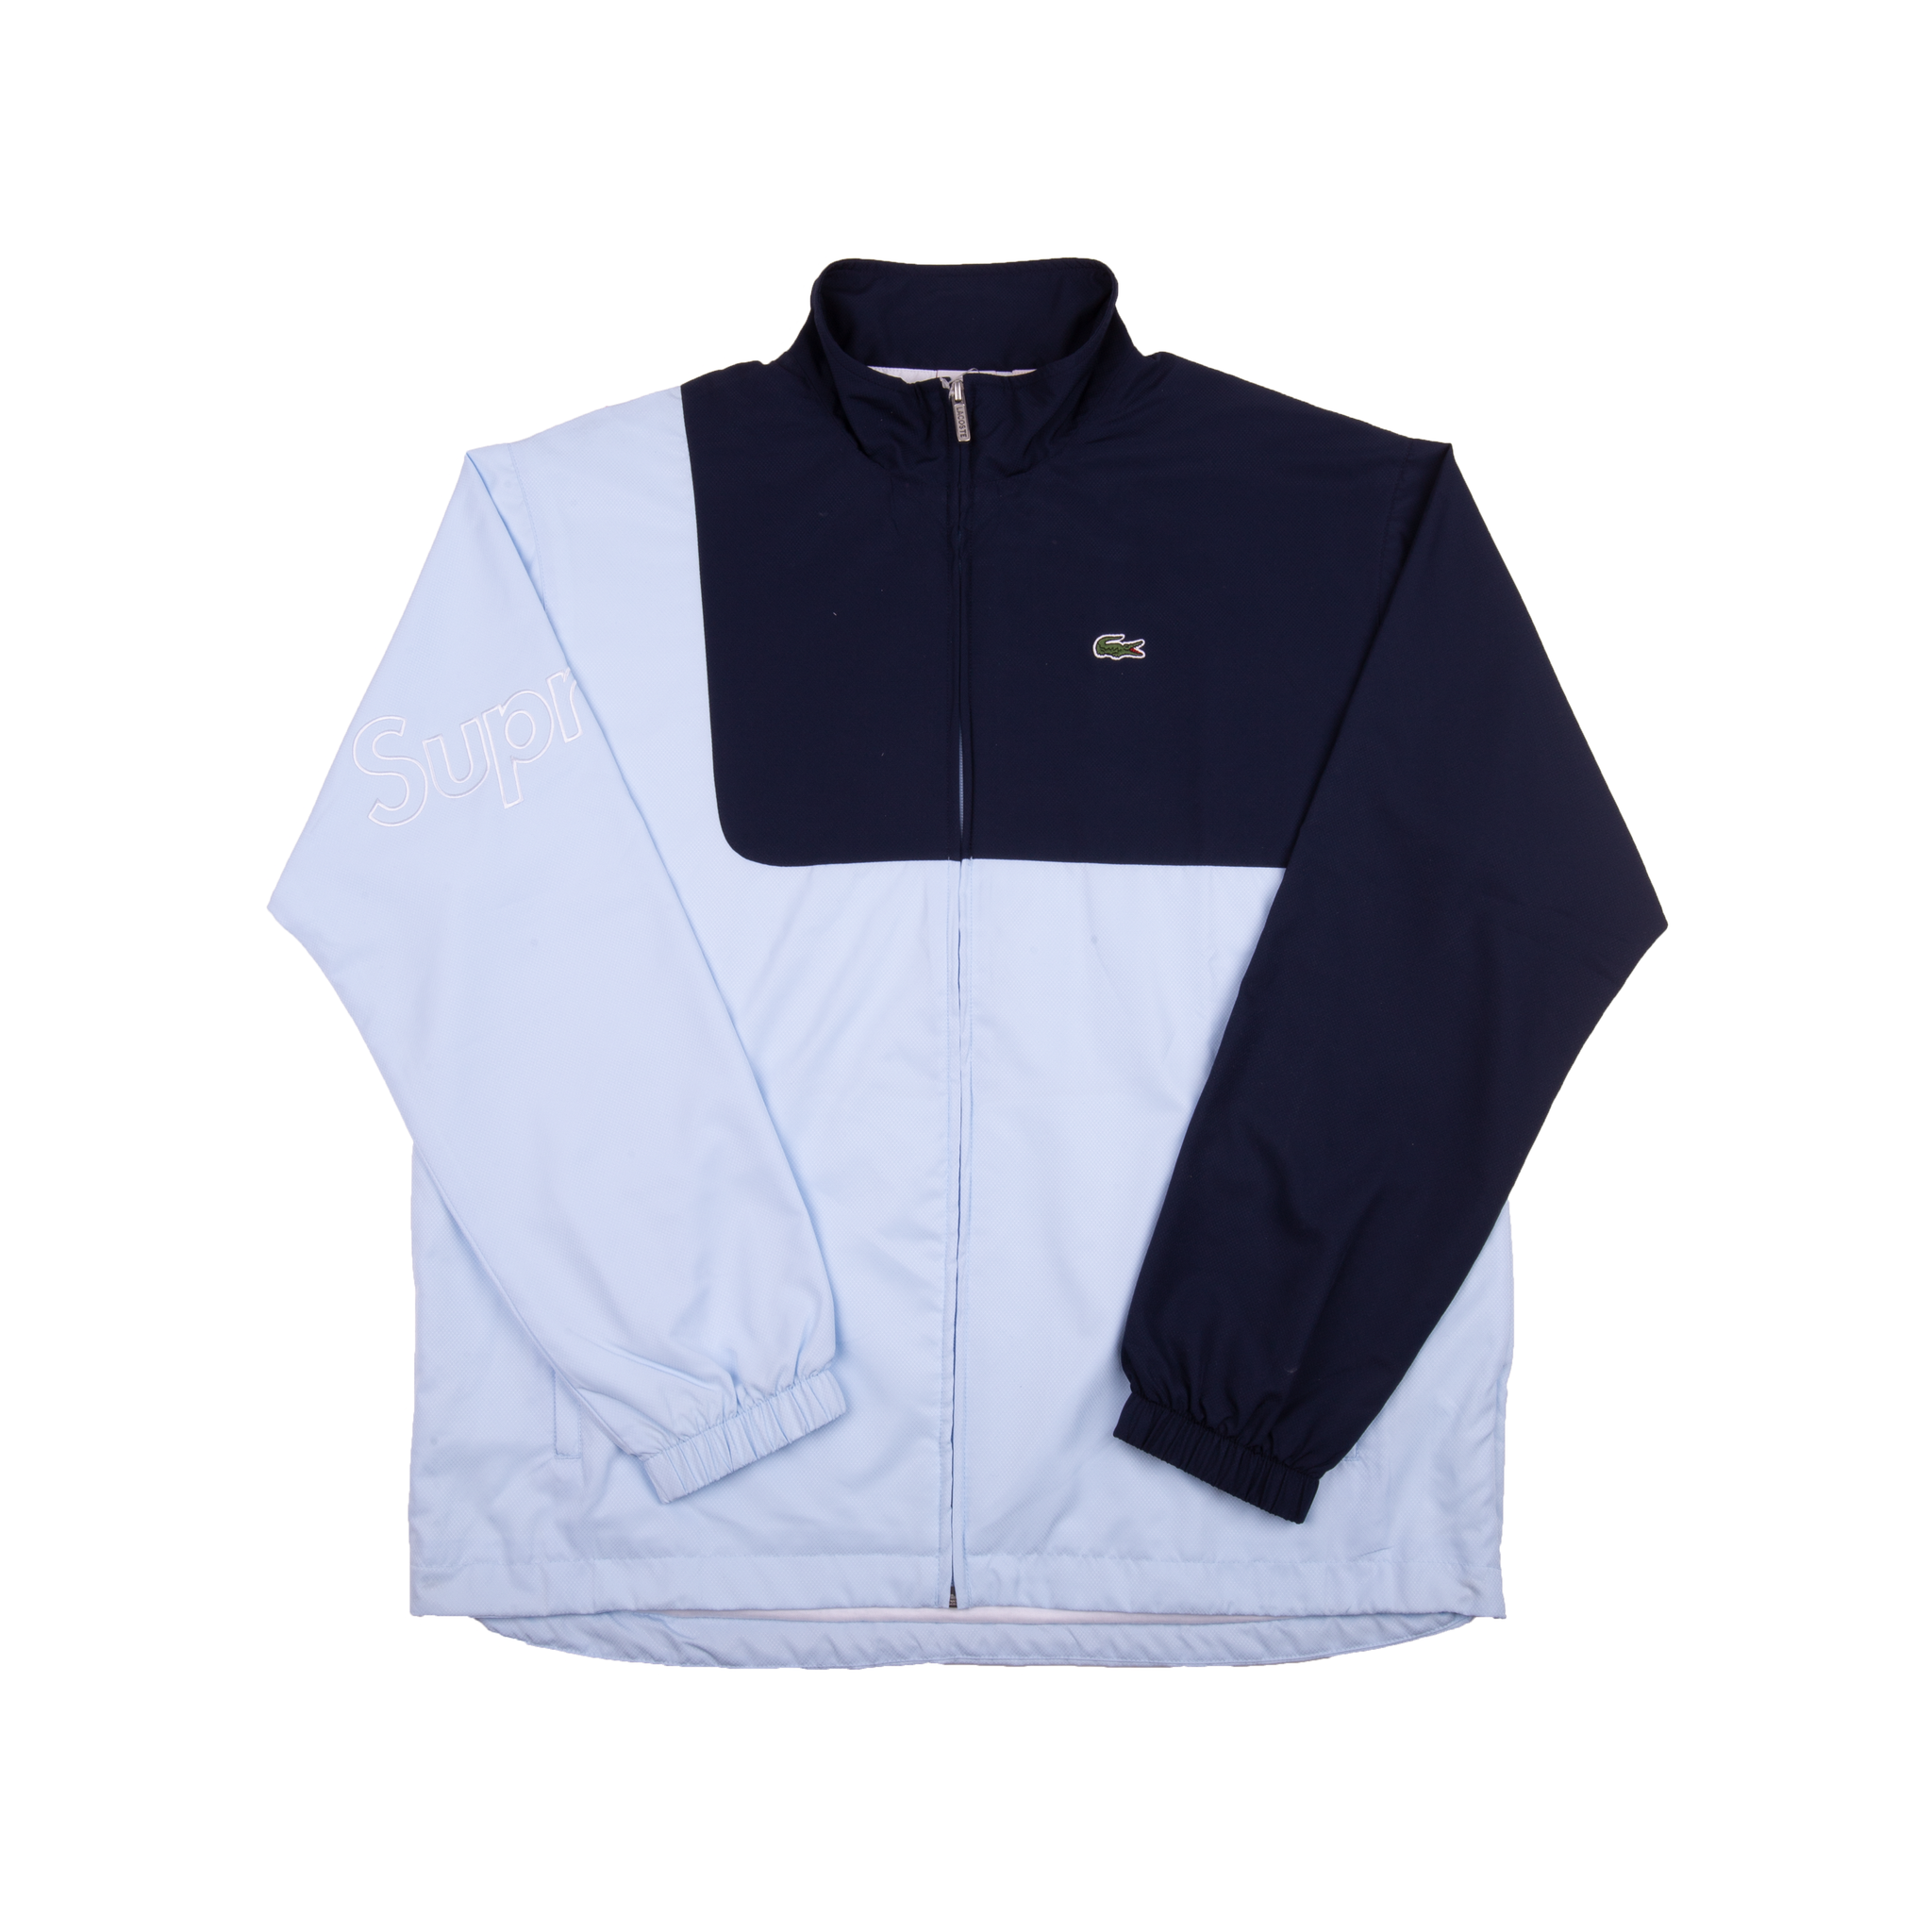 lacoste track top